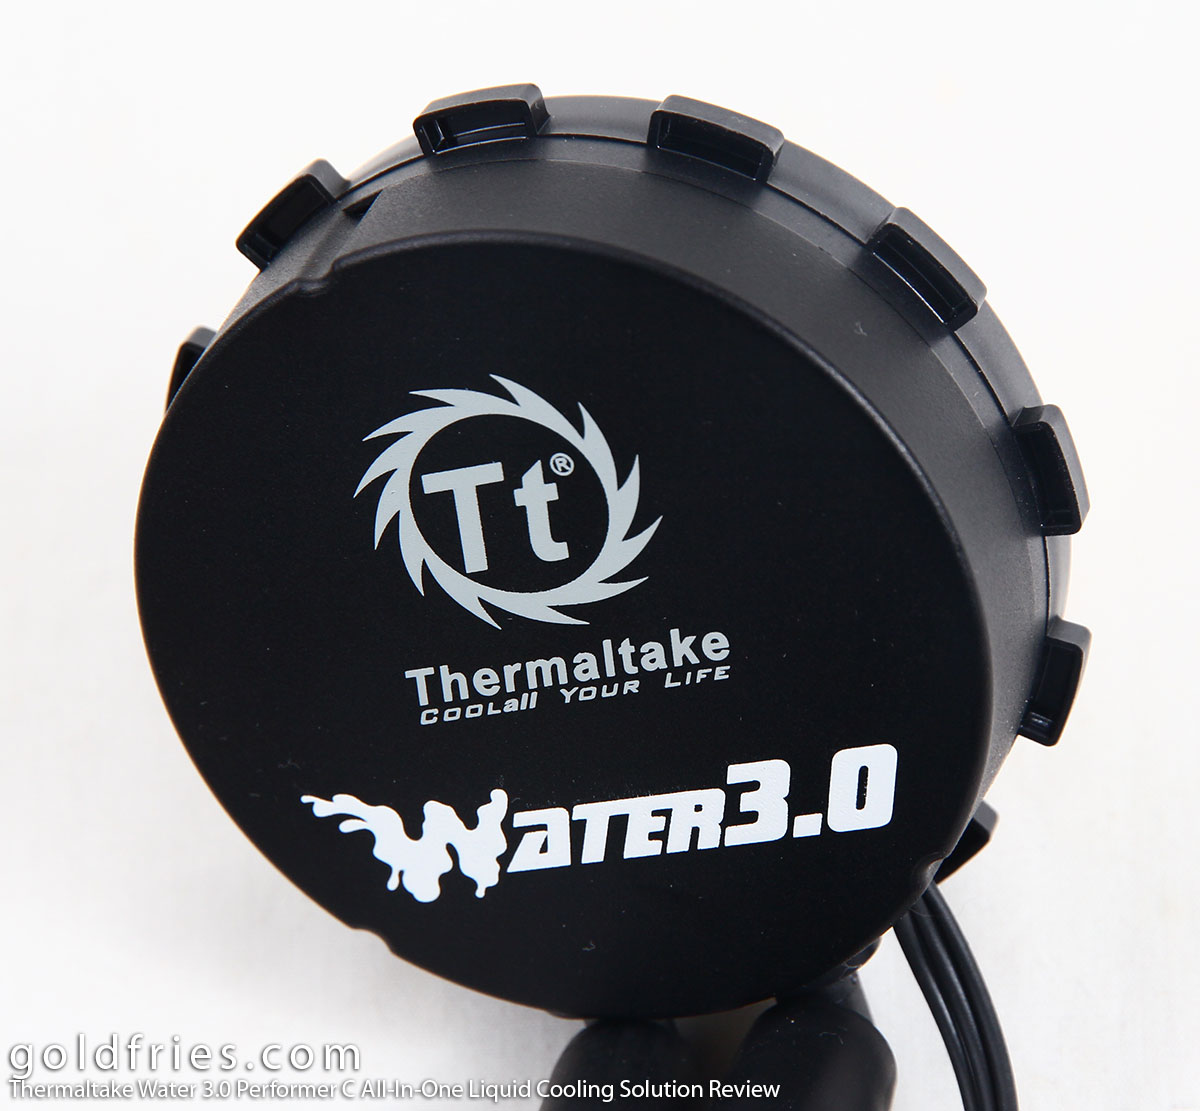 Thermaltake Water 3.0 Performer C All-In-One Liquid Cooling Solution Review